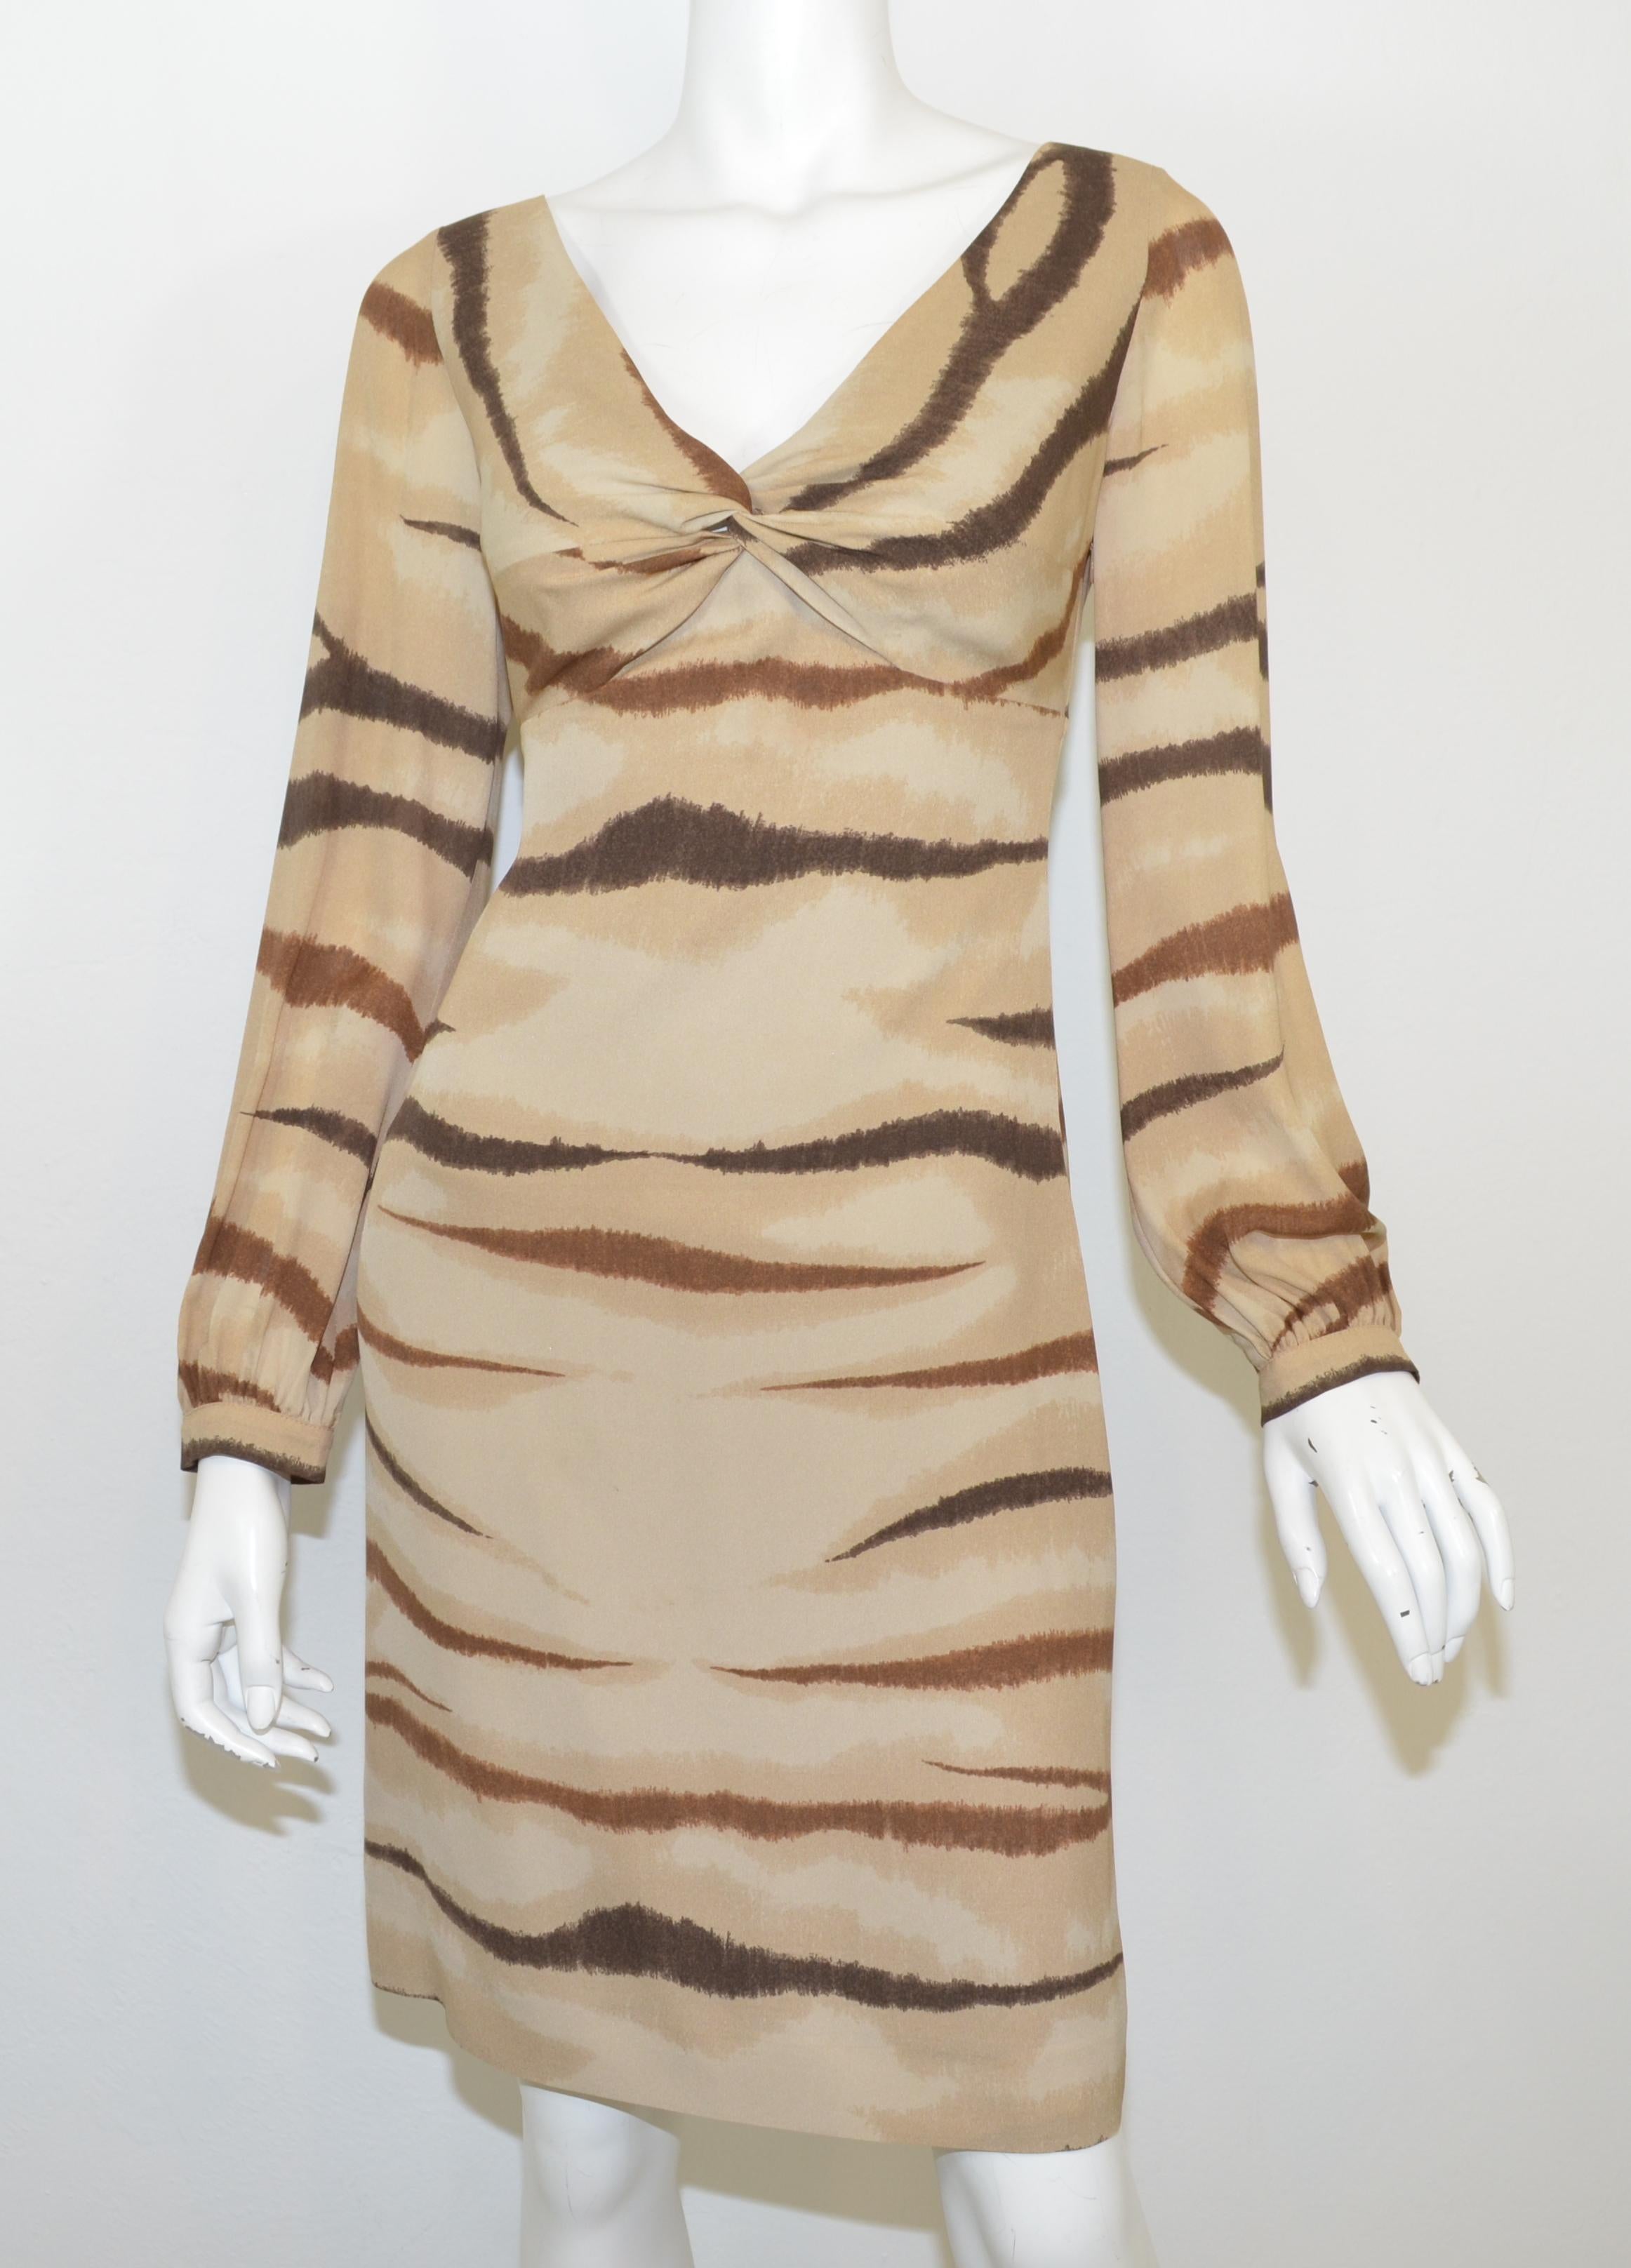 Valentino dress is featured in a tan/brown color with an animal print throughout, a V-neckline, full lining, and a side zipper fastening. Dress is a size 40, made in Italy, and 100% silk.

Measurements: 
bust 34'', waist 28'', hips 34'', sleeves